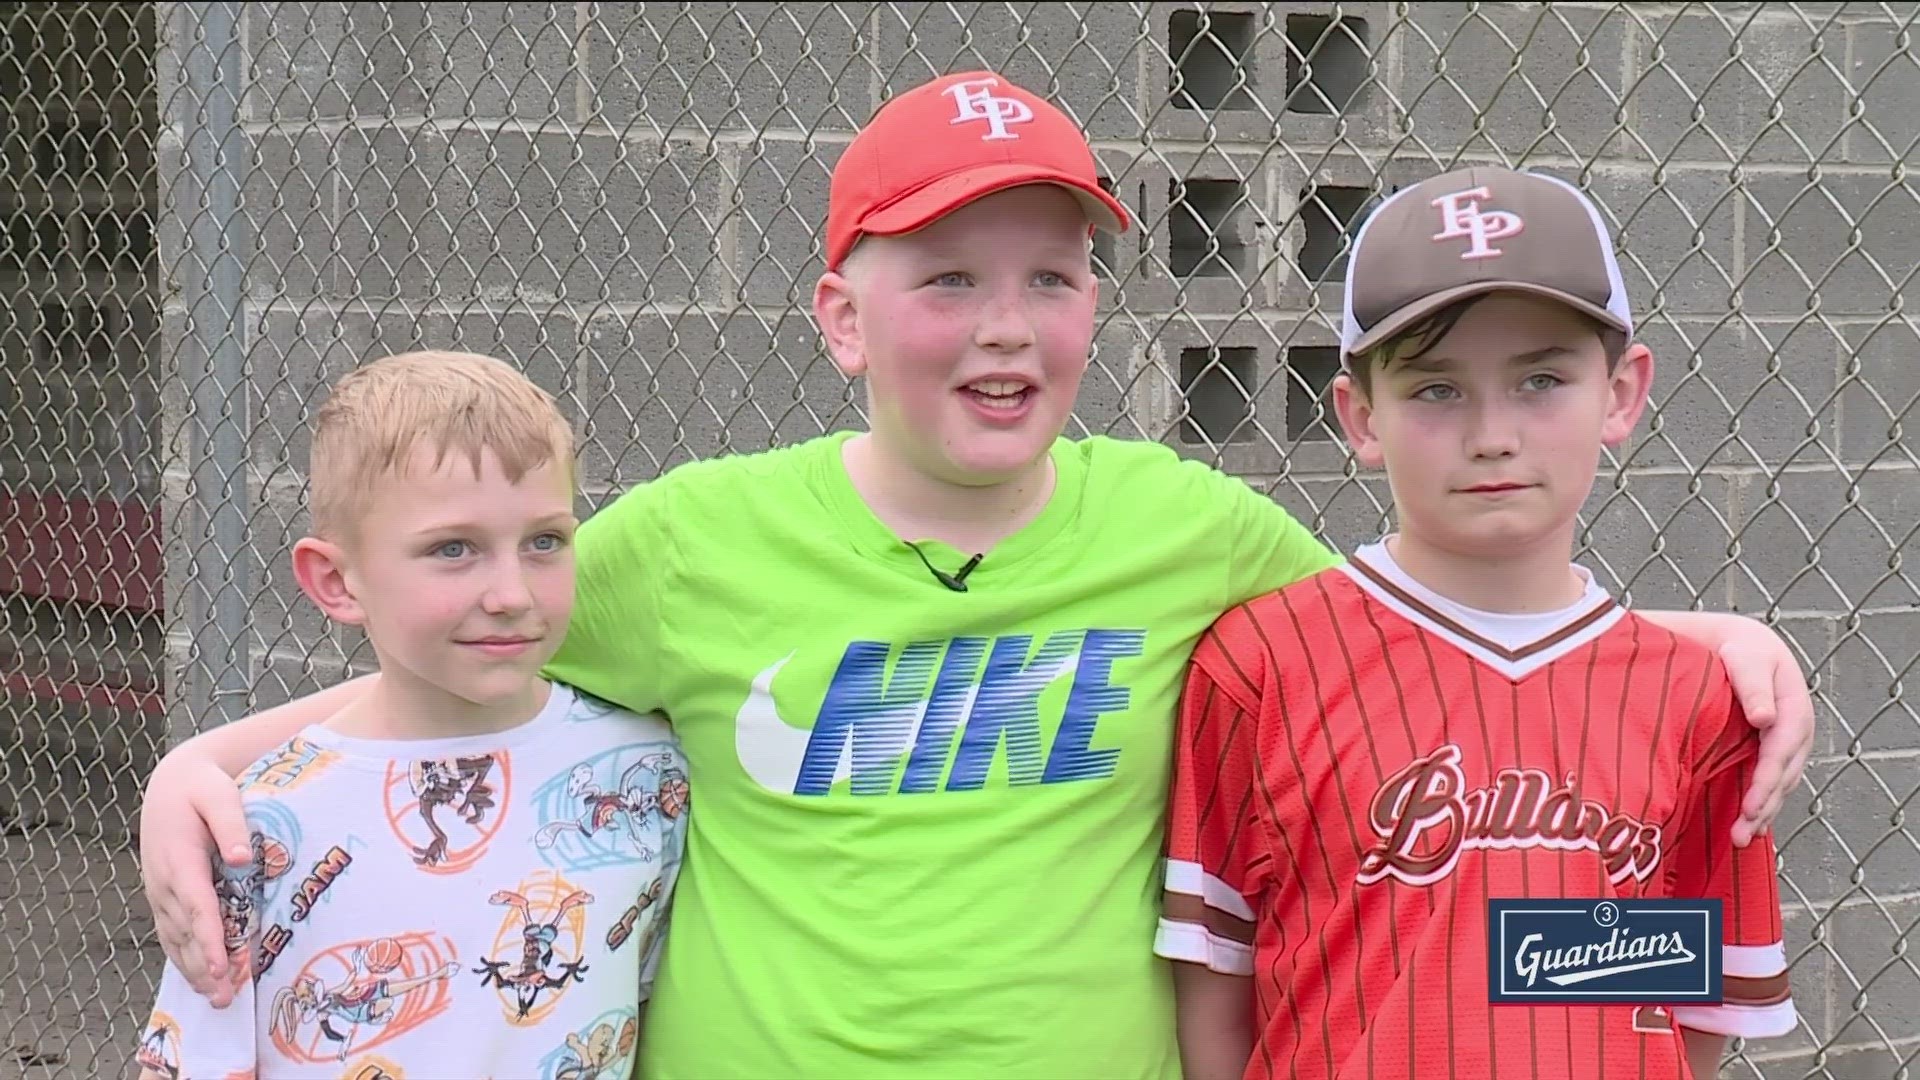 The Cleveland Guardians made sure the little league players felt extra special on opening day at Progressive Field.